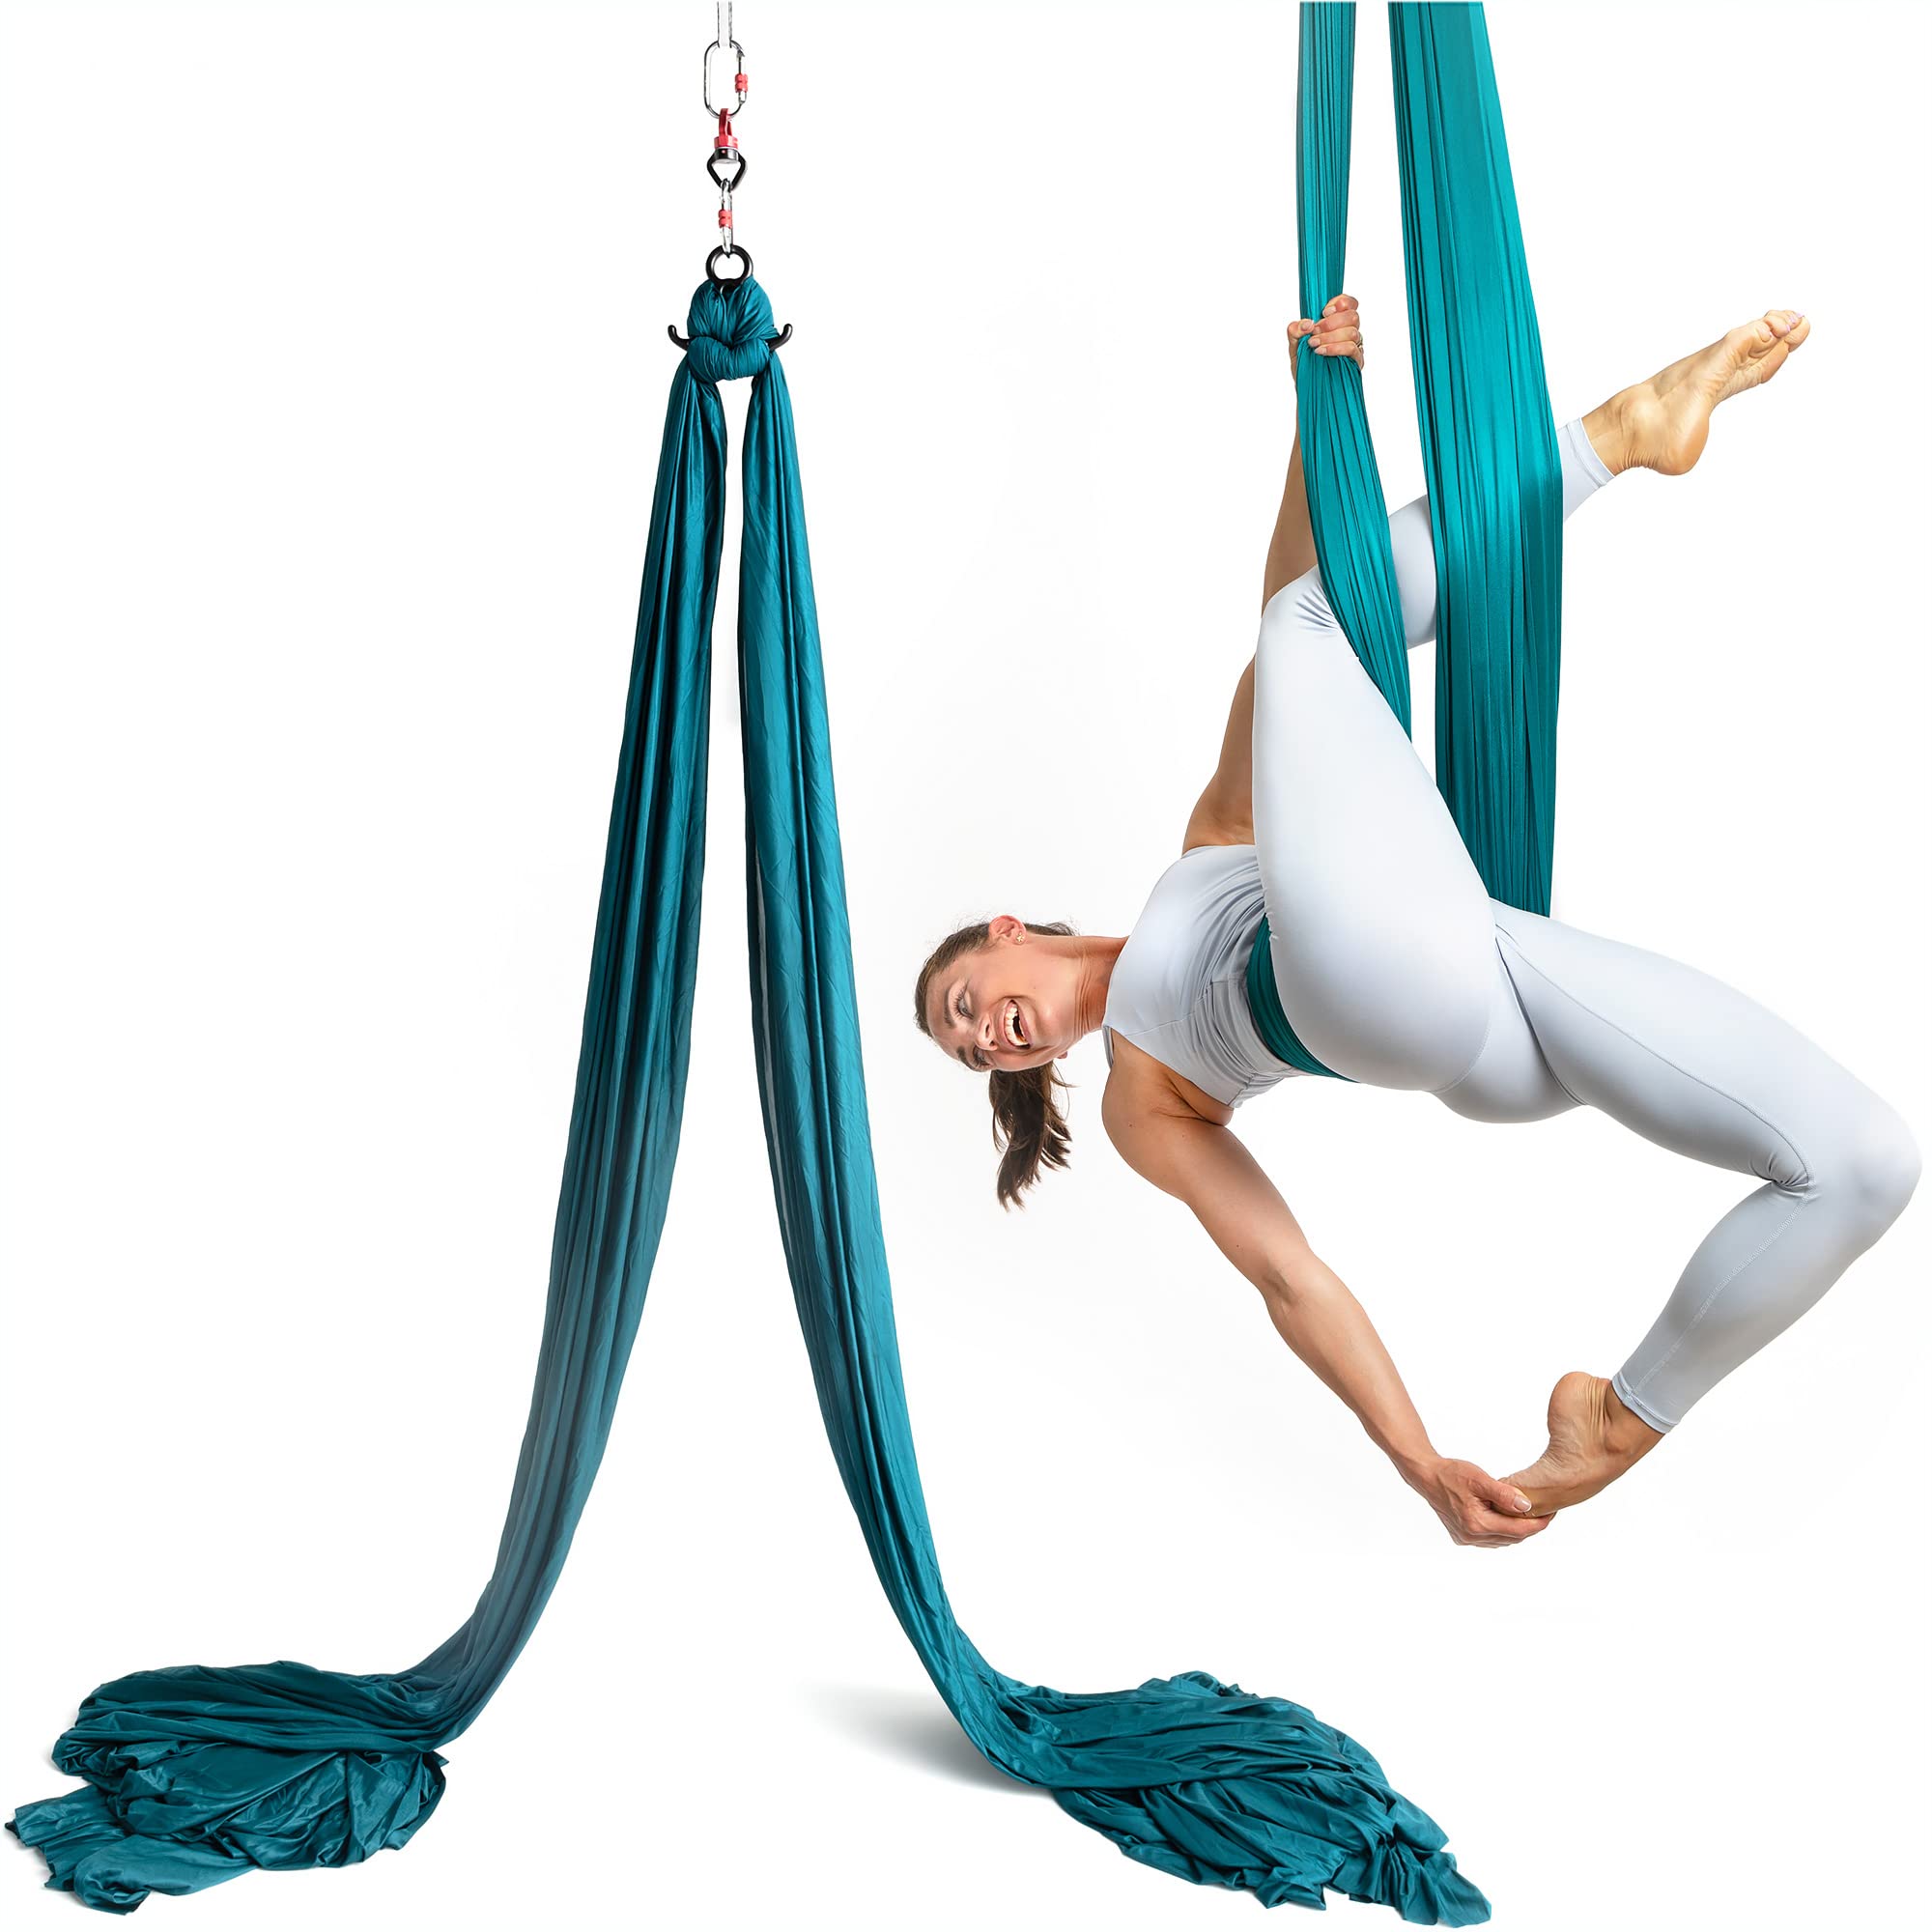 Victorem Aerial Silks - 11 Yards Aerial Silk, Premium Ariel Yoga Hammock,  Durable and Low-Stretch Fabric, Yoga Starter Kit for Home, Aerial Rig for  All Skill Levels - All Hardware Included